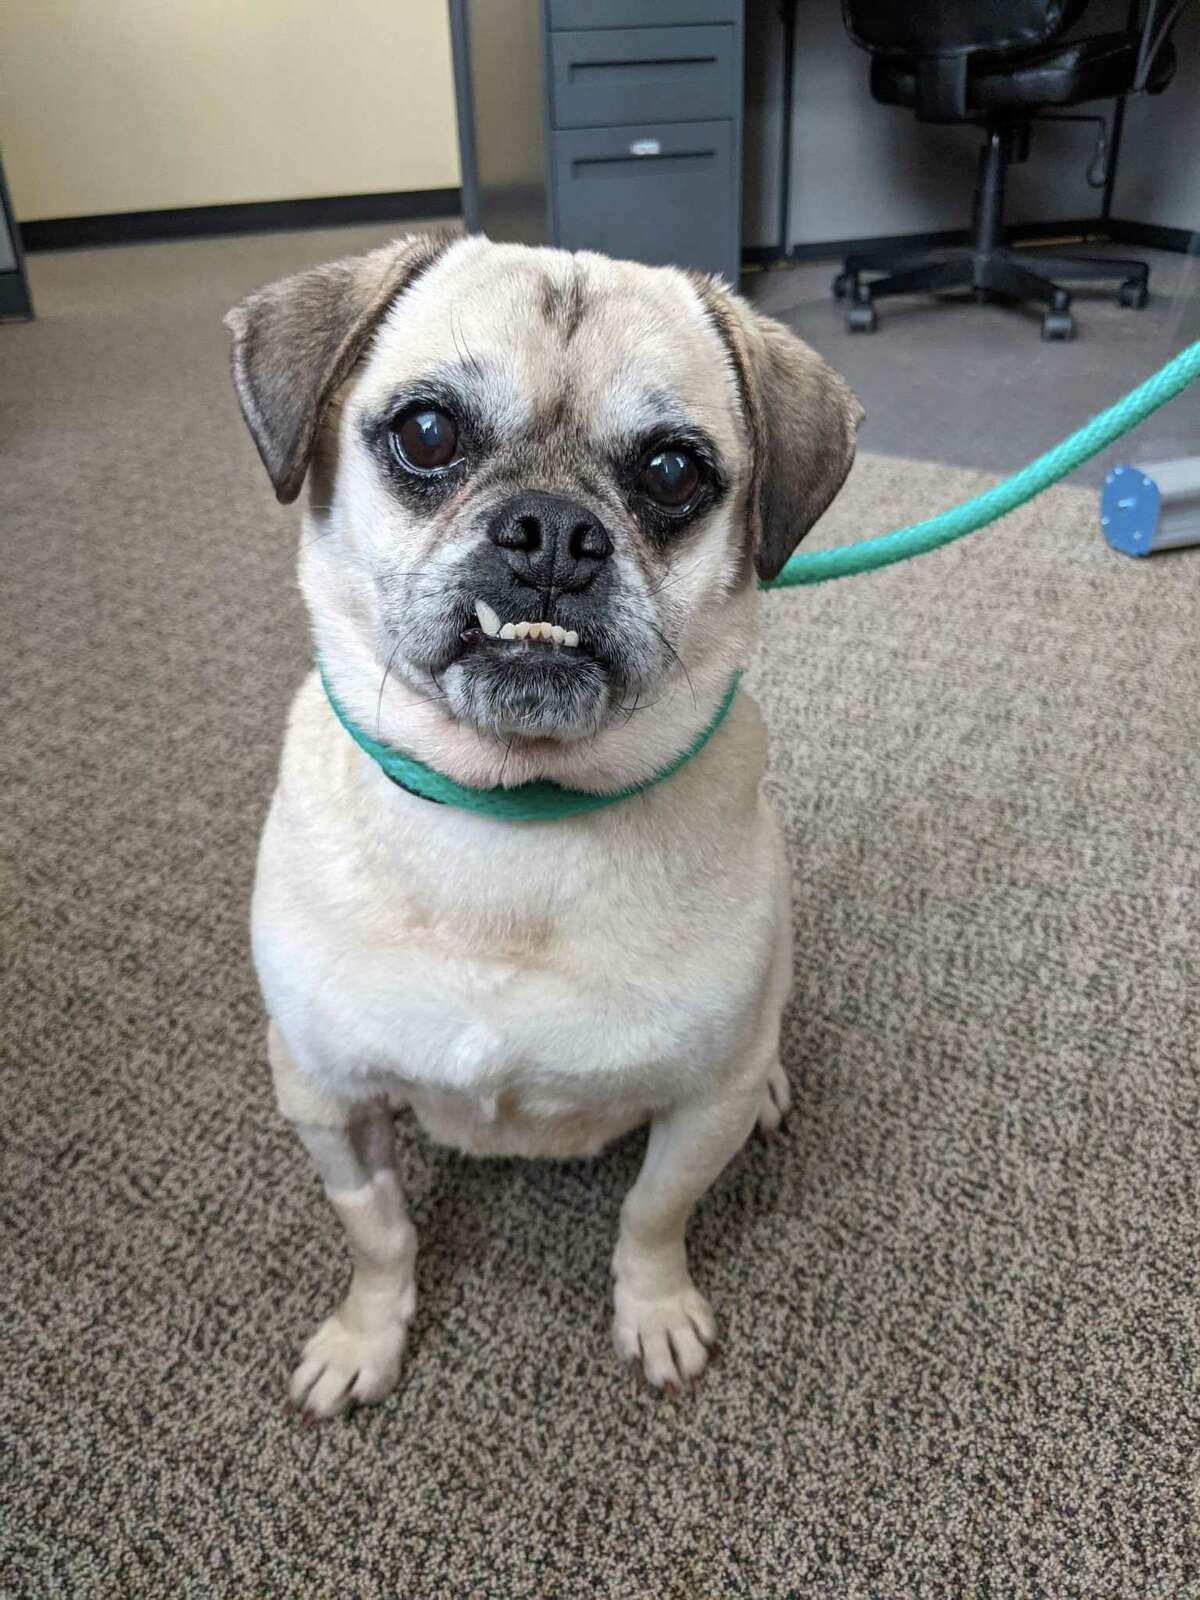 Kevin might have the cutest underbite you’ve ever seen, and this 9-year-old puggle will love hearing you admire his good looks. He soaks up attention from human pals and can sometimes be pretty mellow…until it’s playtime. Then, he shows you his energetic side. And when he goes for a walk, that’s when the beagle in him comes out, sniffing everything around him with his powerful nose. He’s on a special diet for bladder stones, and has had several removed during surgery with the Connecticut Humane Society’s staff veterinary team. The special diet will keep him from developing more stones. Since Kevin hasn’t had much experience with other animals, he’d love to be your one and only pet. If there are kiddos in his future home, they should be 10 years old and up. Visit CThumane.org/adopt to learn more